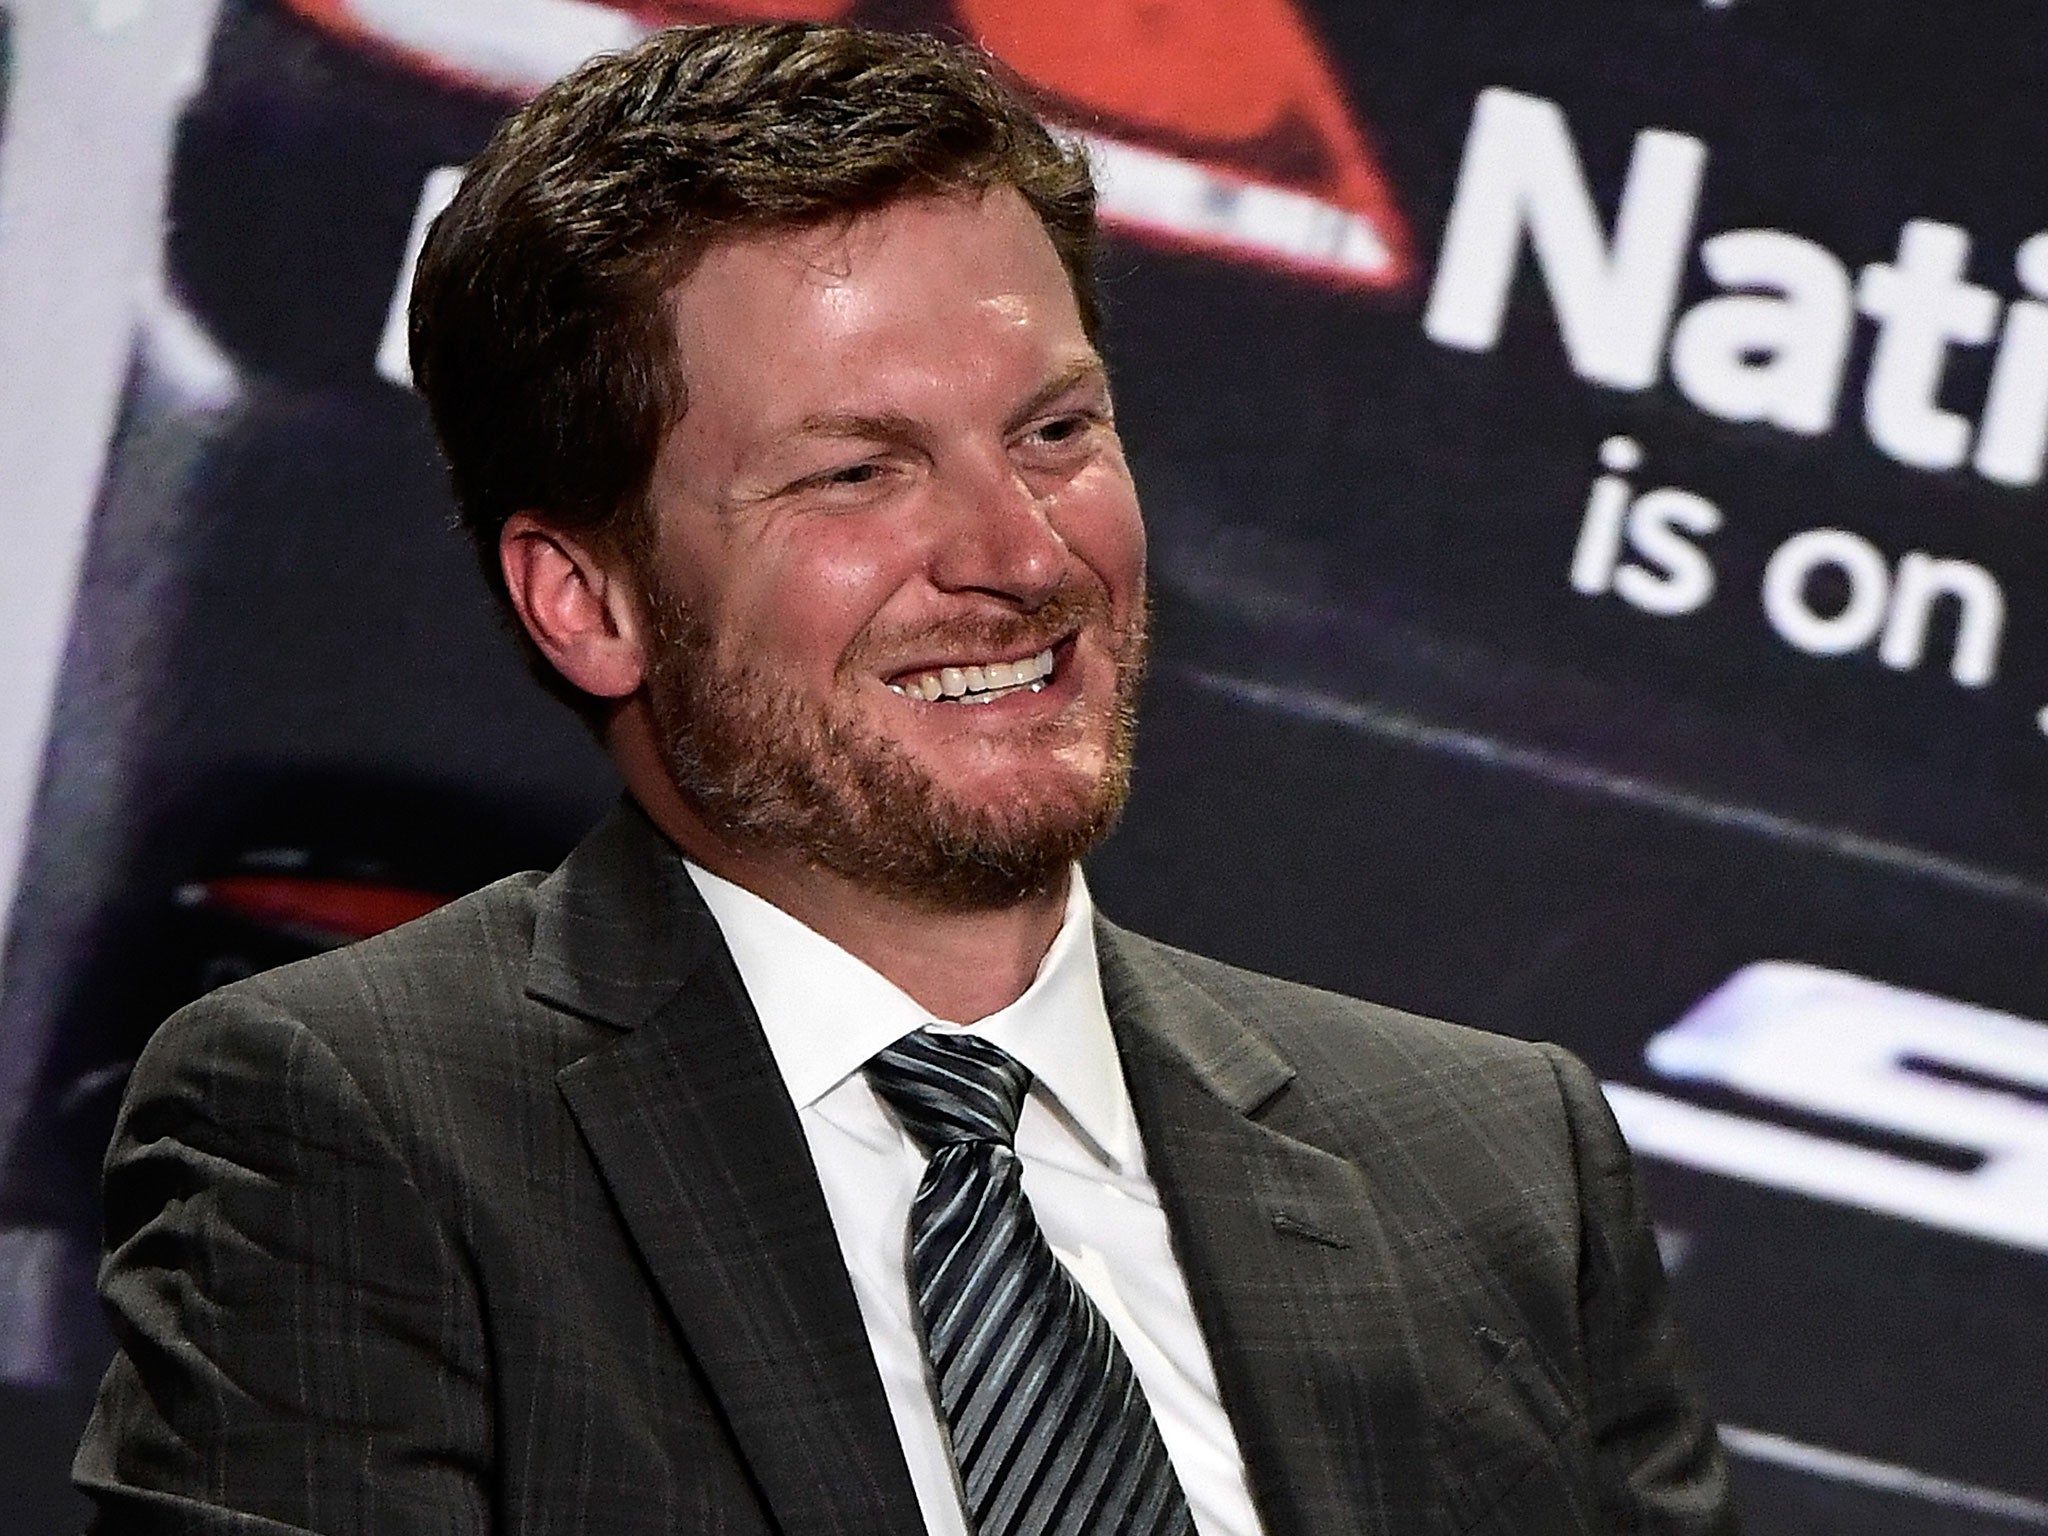 Dale Earnhardt Jr announced on Tuesday that he will retire from Nascar at the end of the season